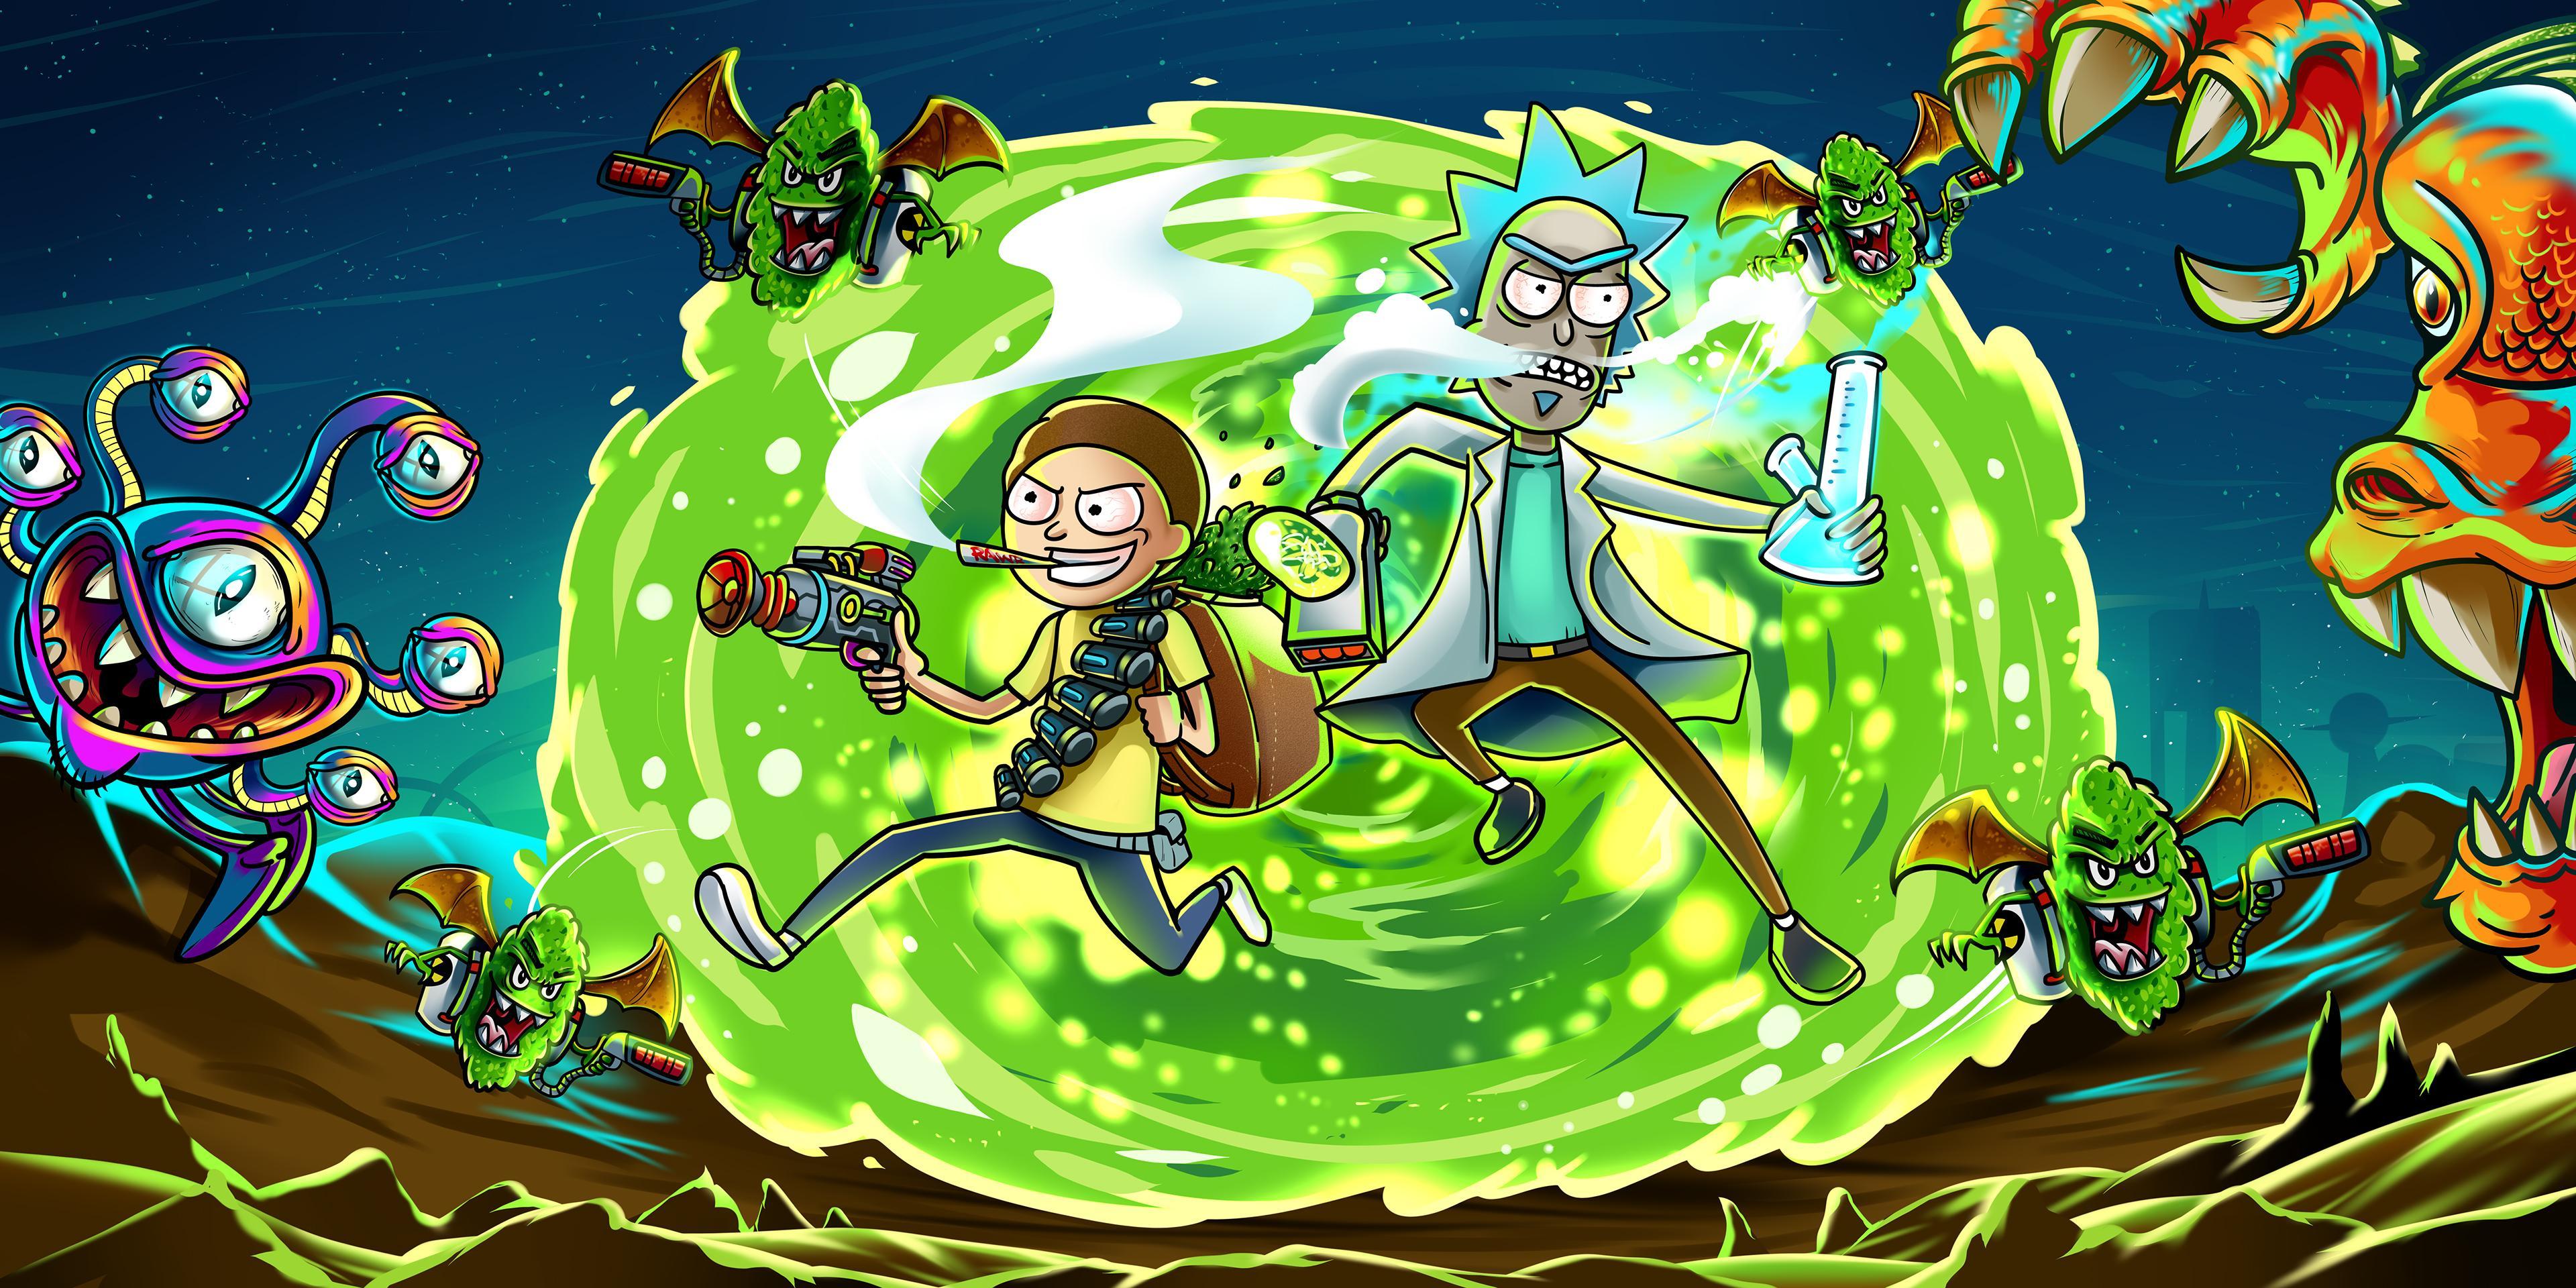 Rick And Morty wallpapers for desktop, download free Rick And Morty  pictures and backgrounds for PC